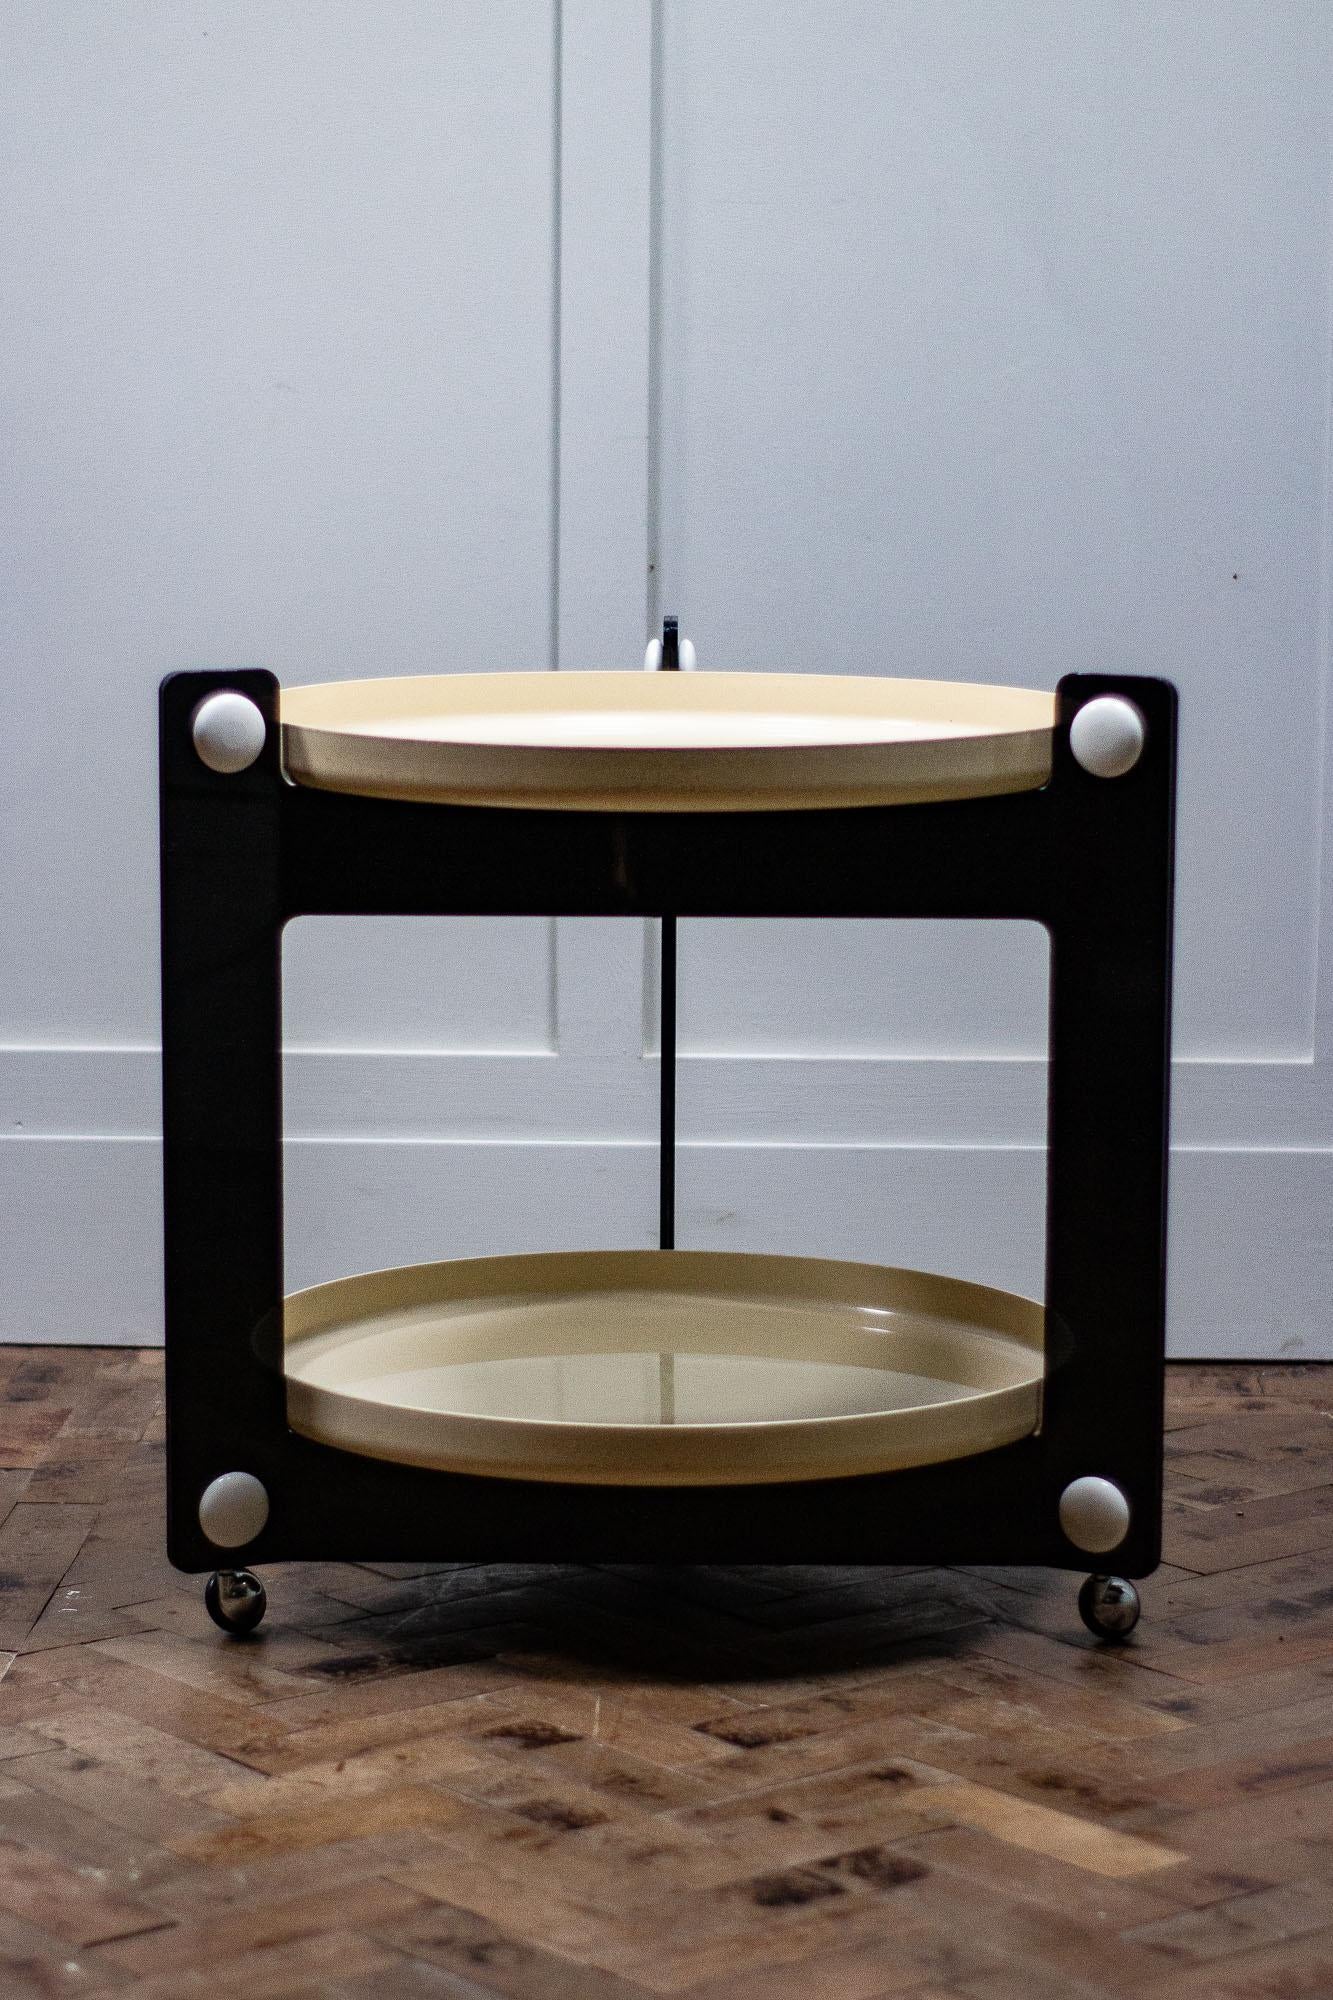 1970s Italian drinks trolley was designed by Luigi Massoni for Guzzini. 

The trolley features two trays, made of plastic. 

The two removable circular trays sit within the triangular structure.

Also in the style of Italian modern, Space Age